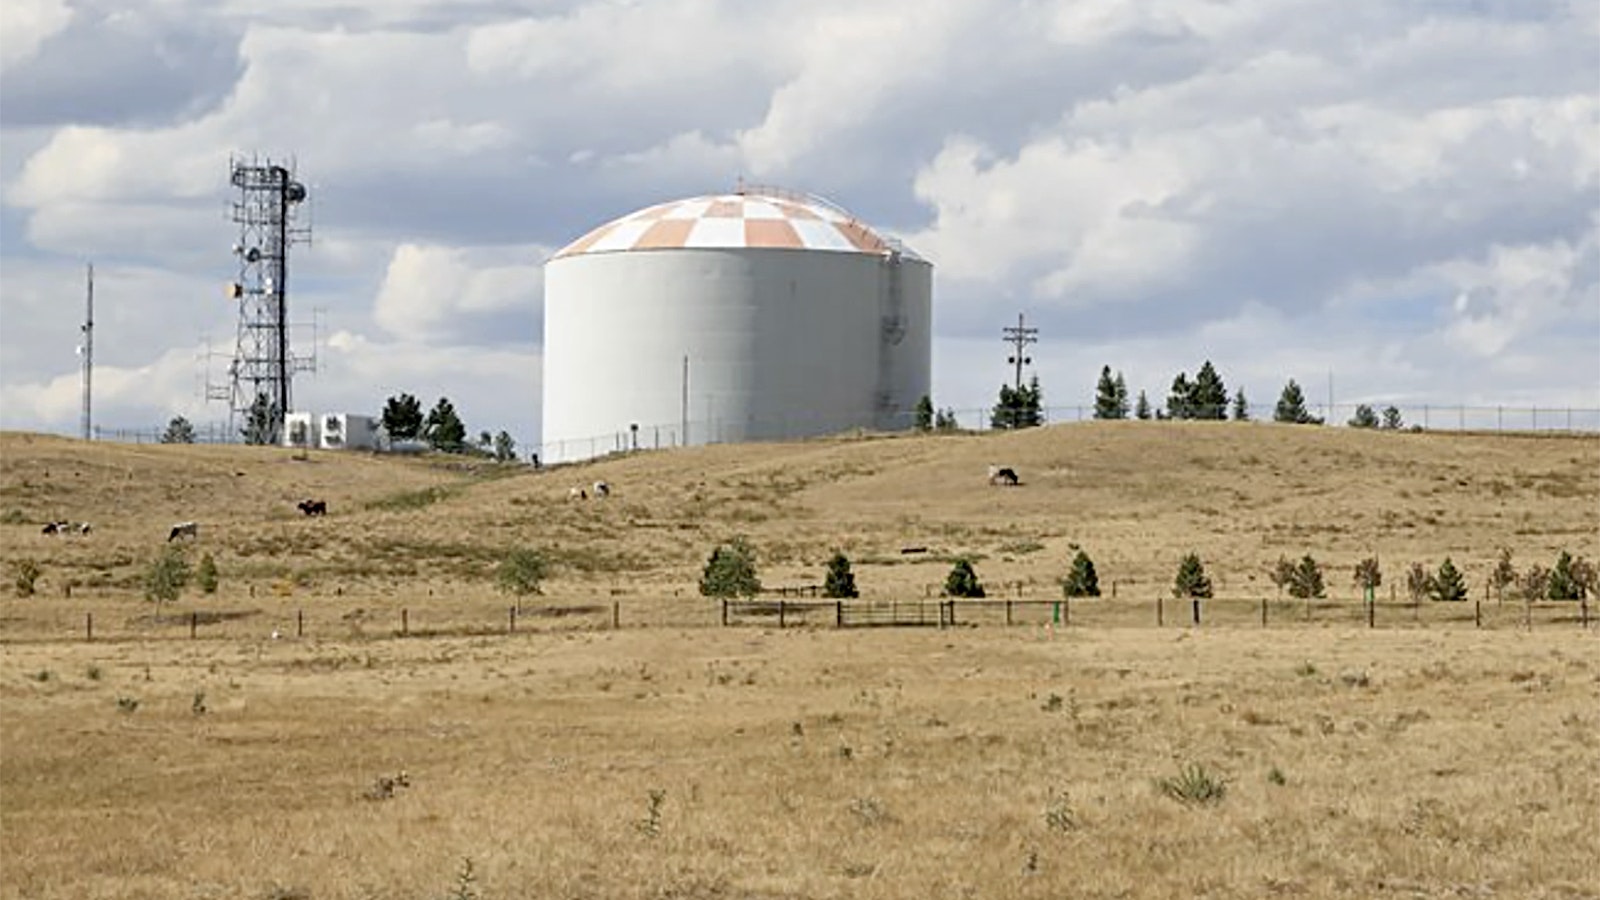 A water tower stands over dry grass north of Cheyenne in Laramie County.